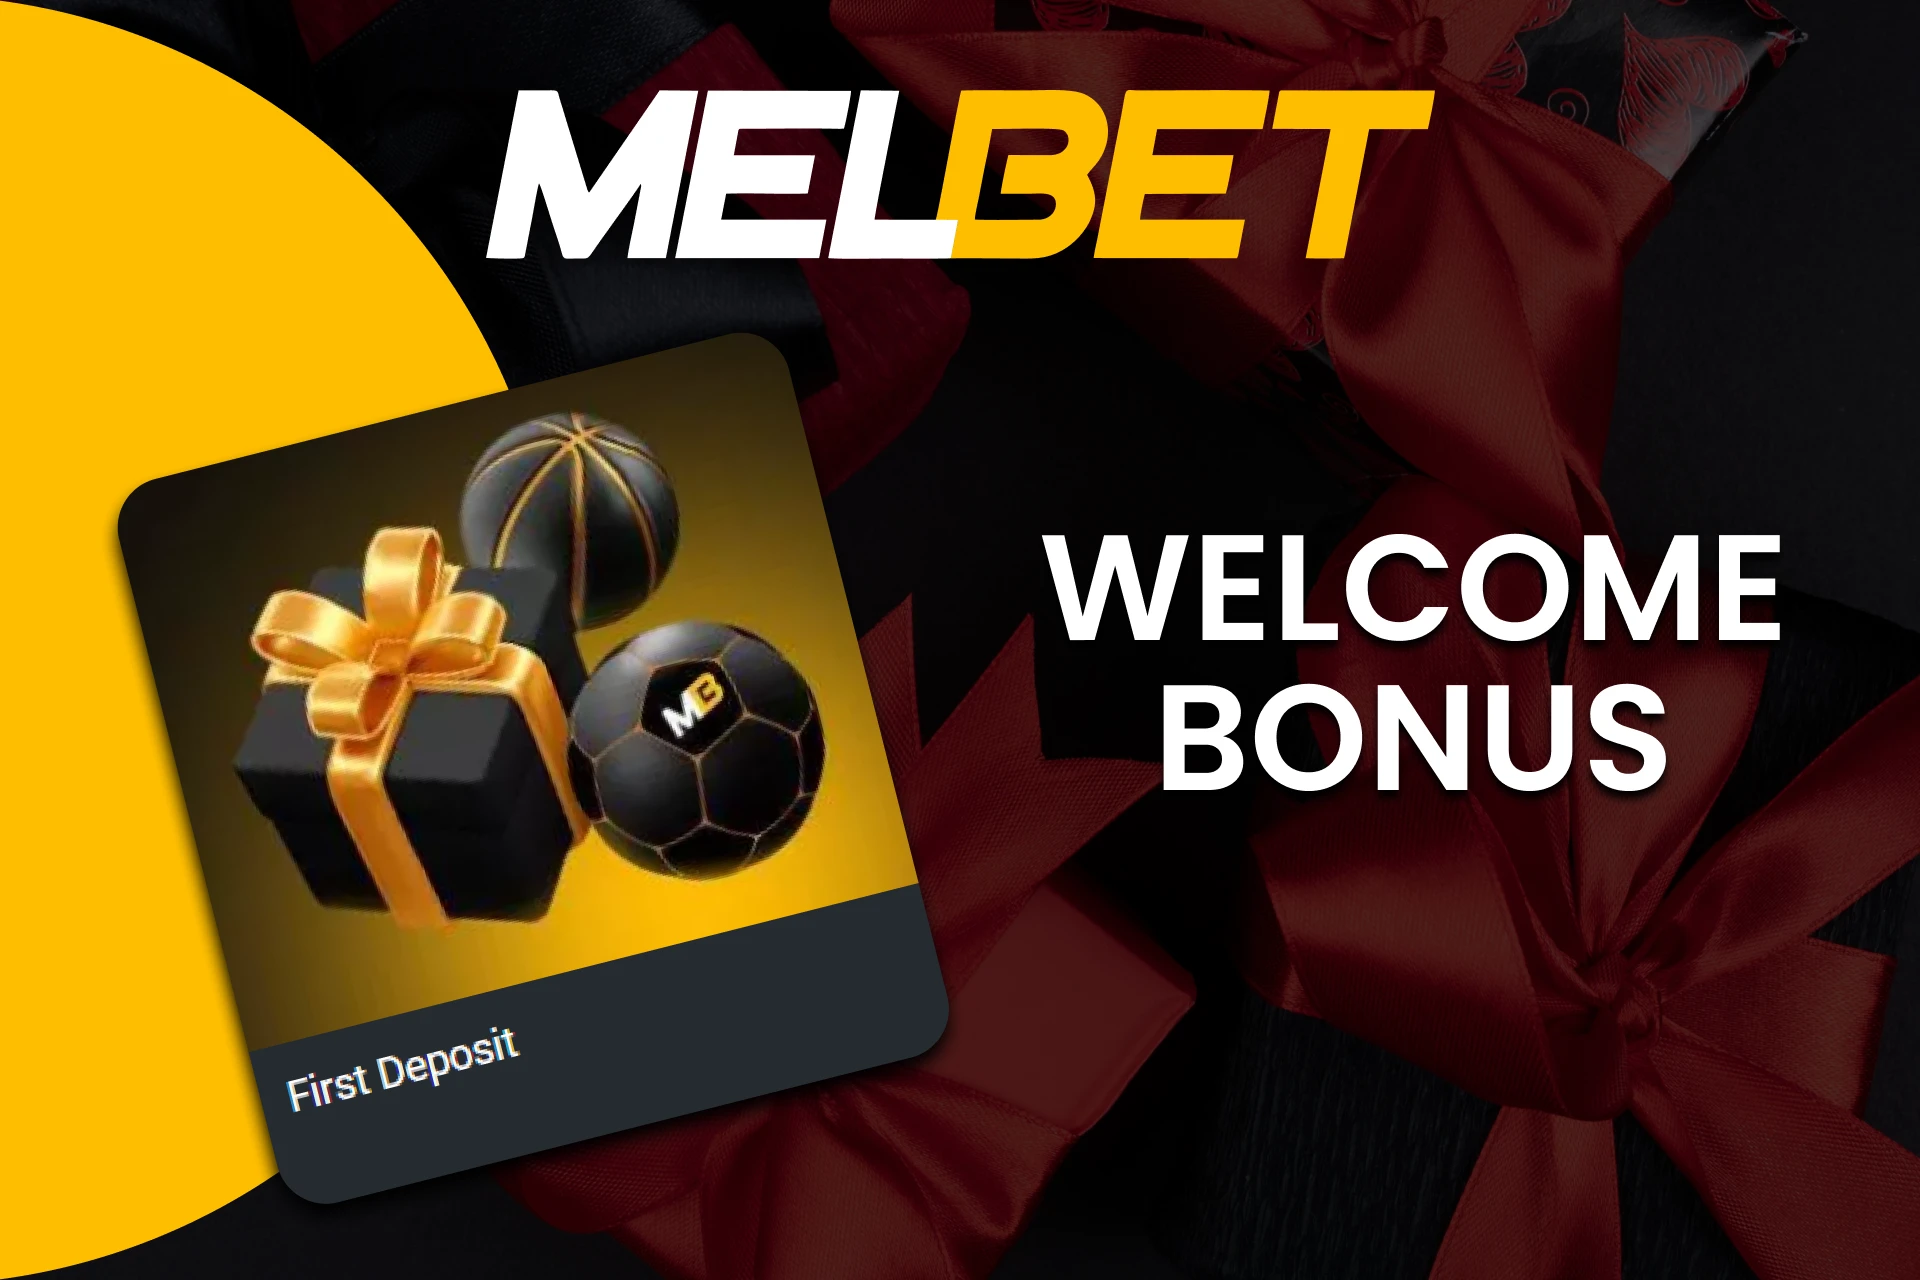 Get a bonus for betting on baseball from Melbet.